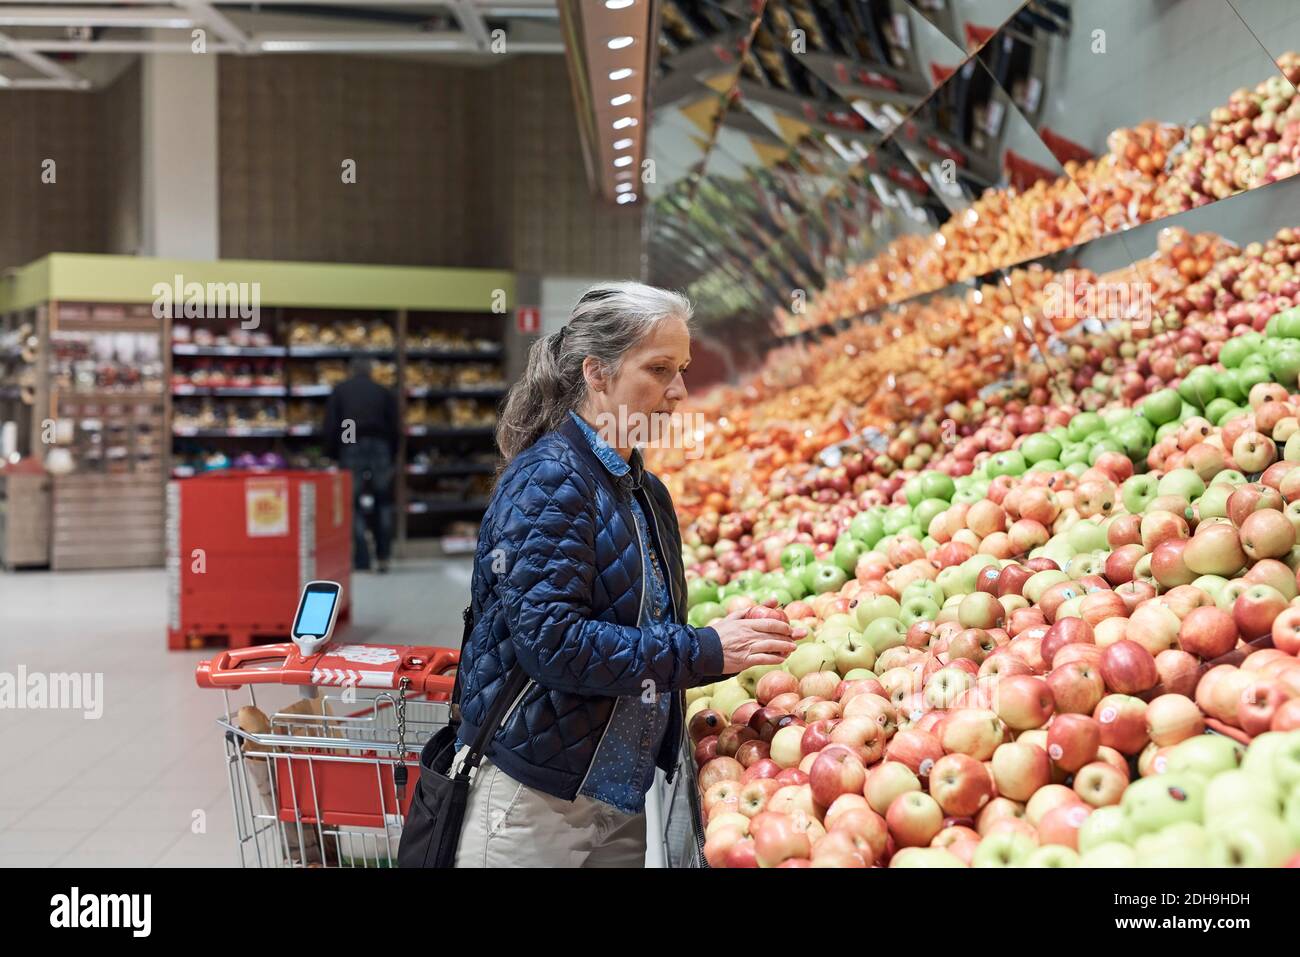 Mature woman buying apples at supermarket Stock Photo